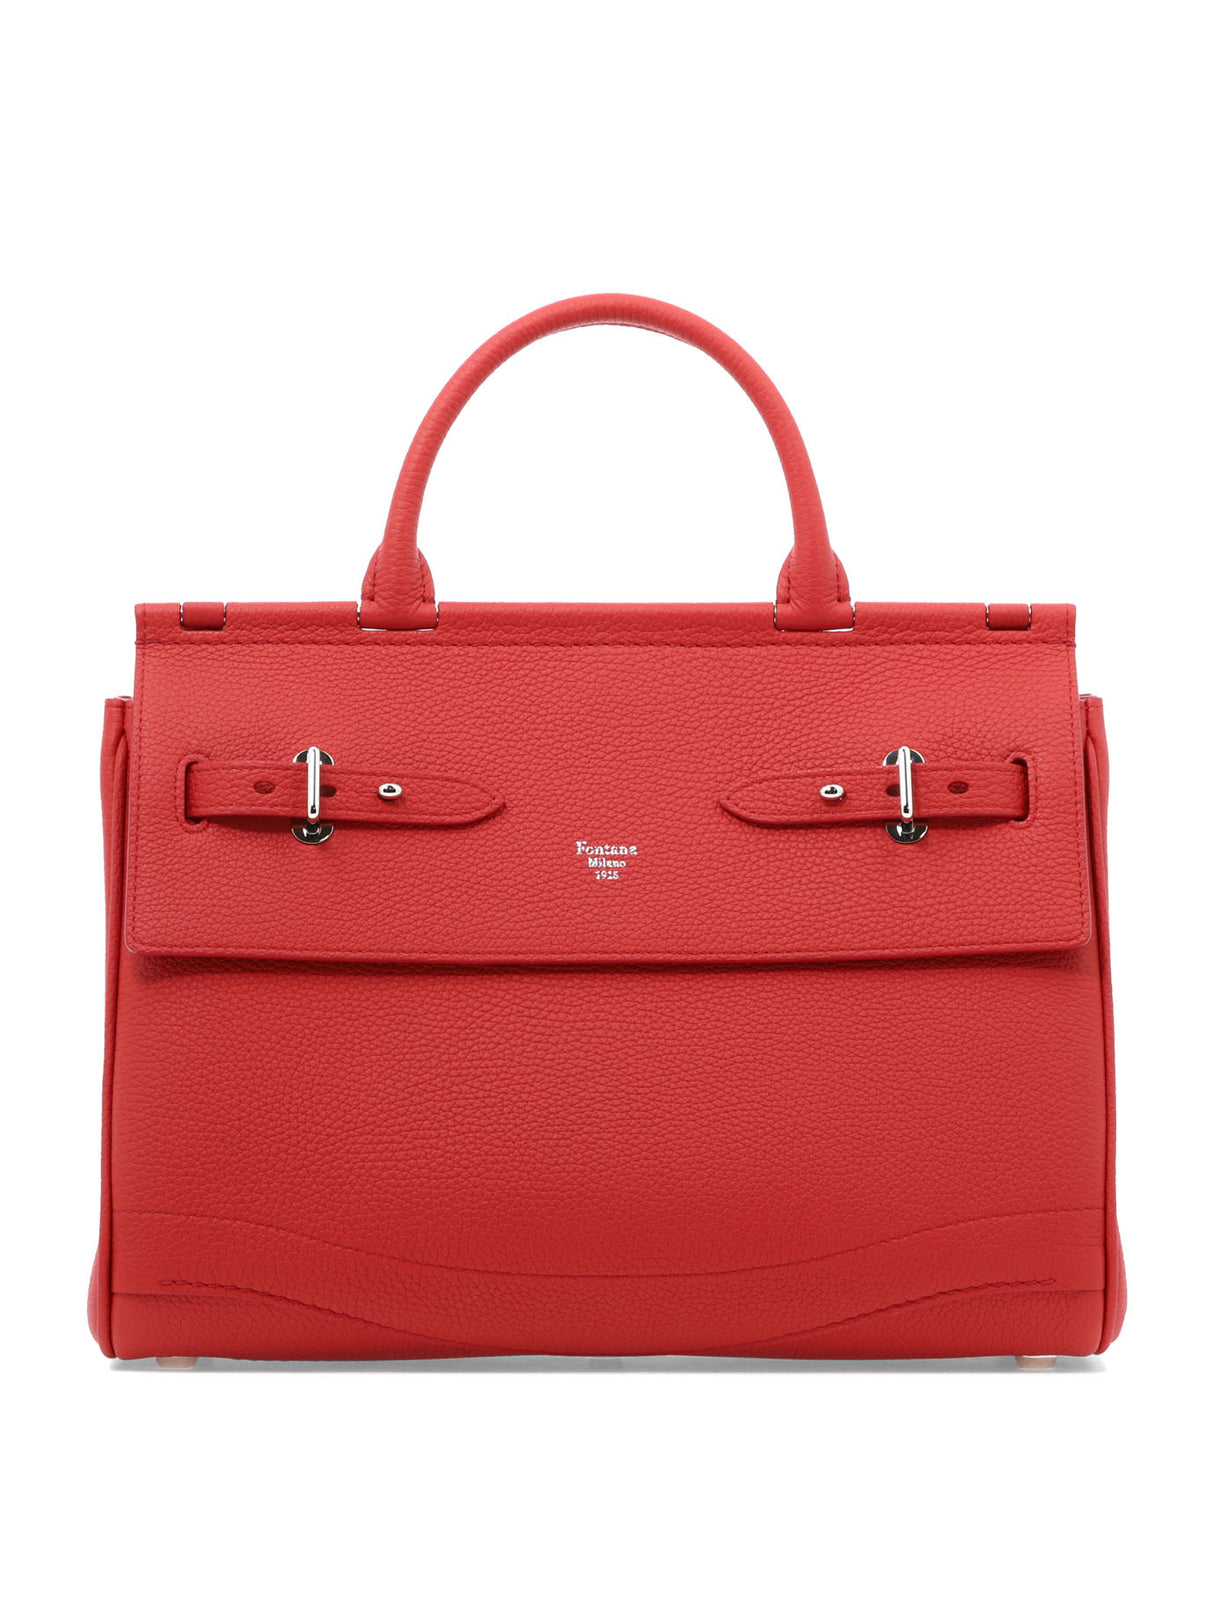 Red Leather Handbag with Belt Closure and Open Pockets